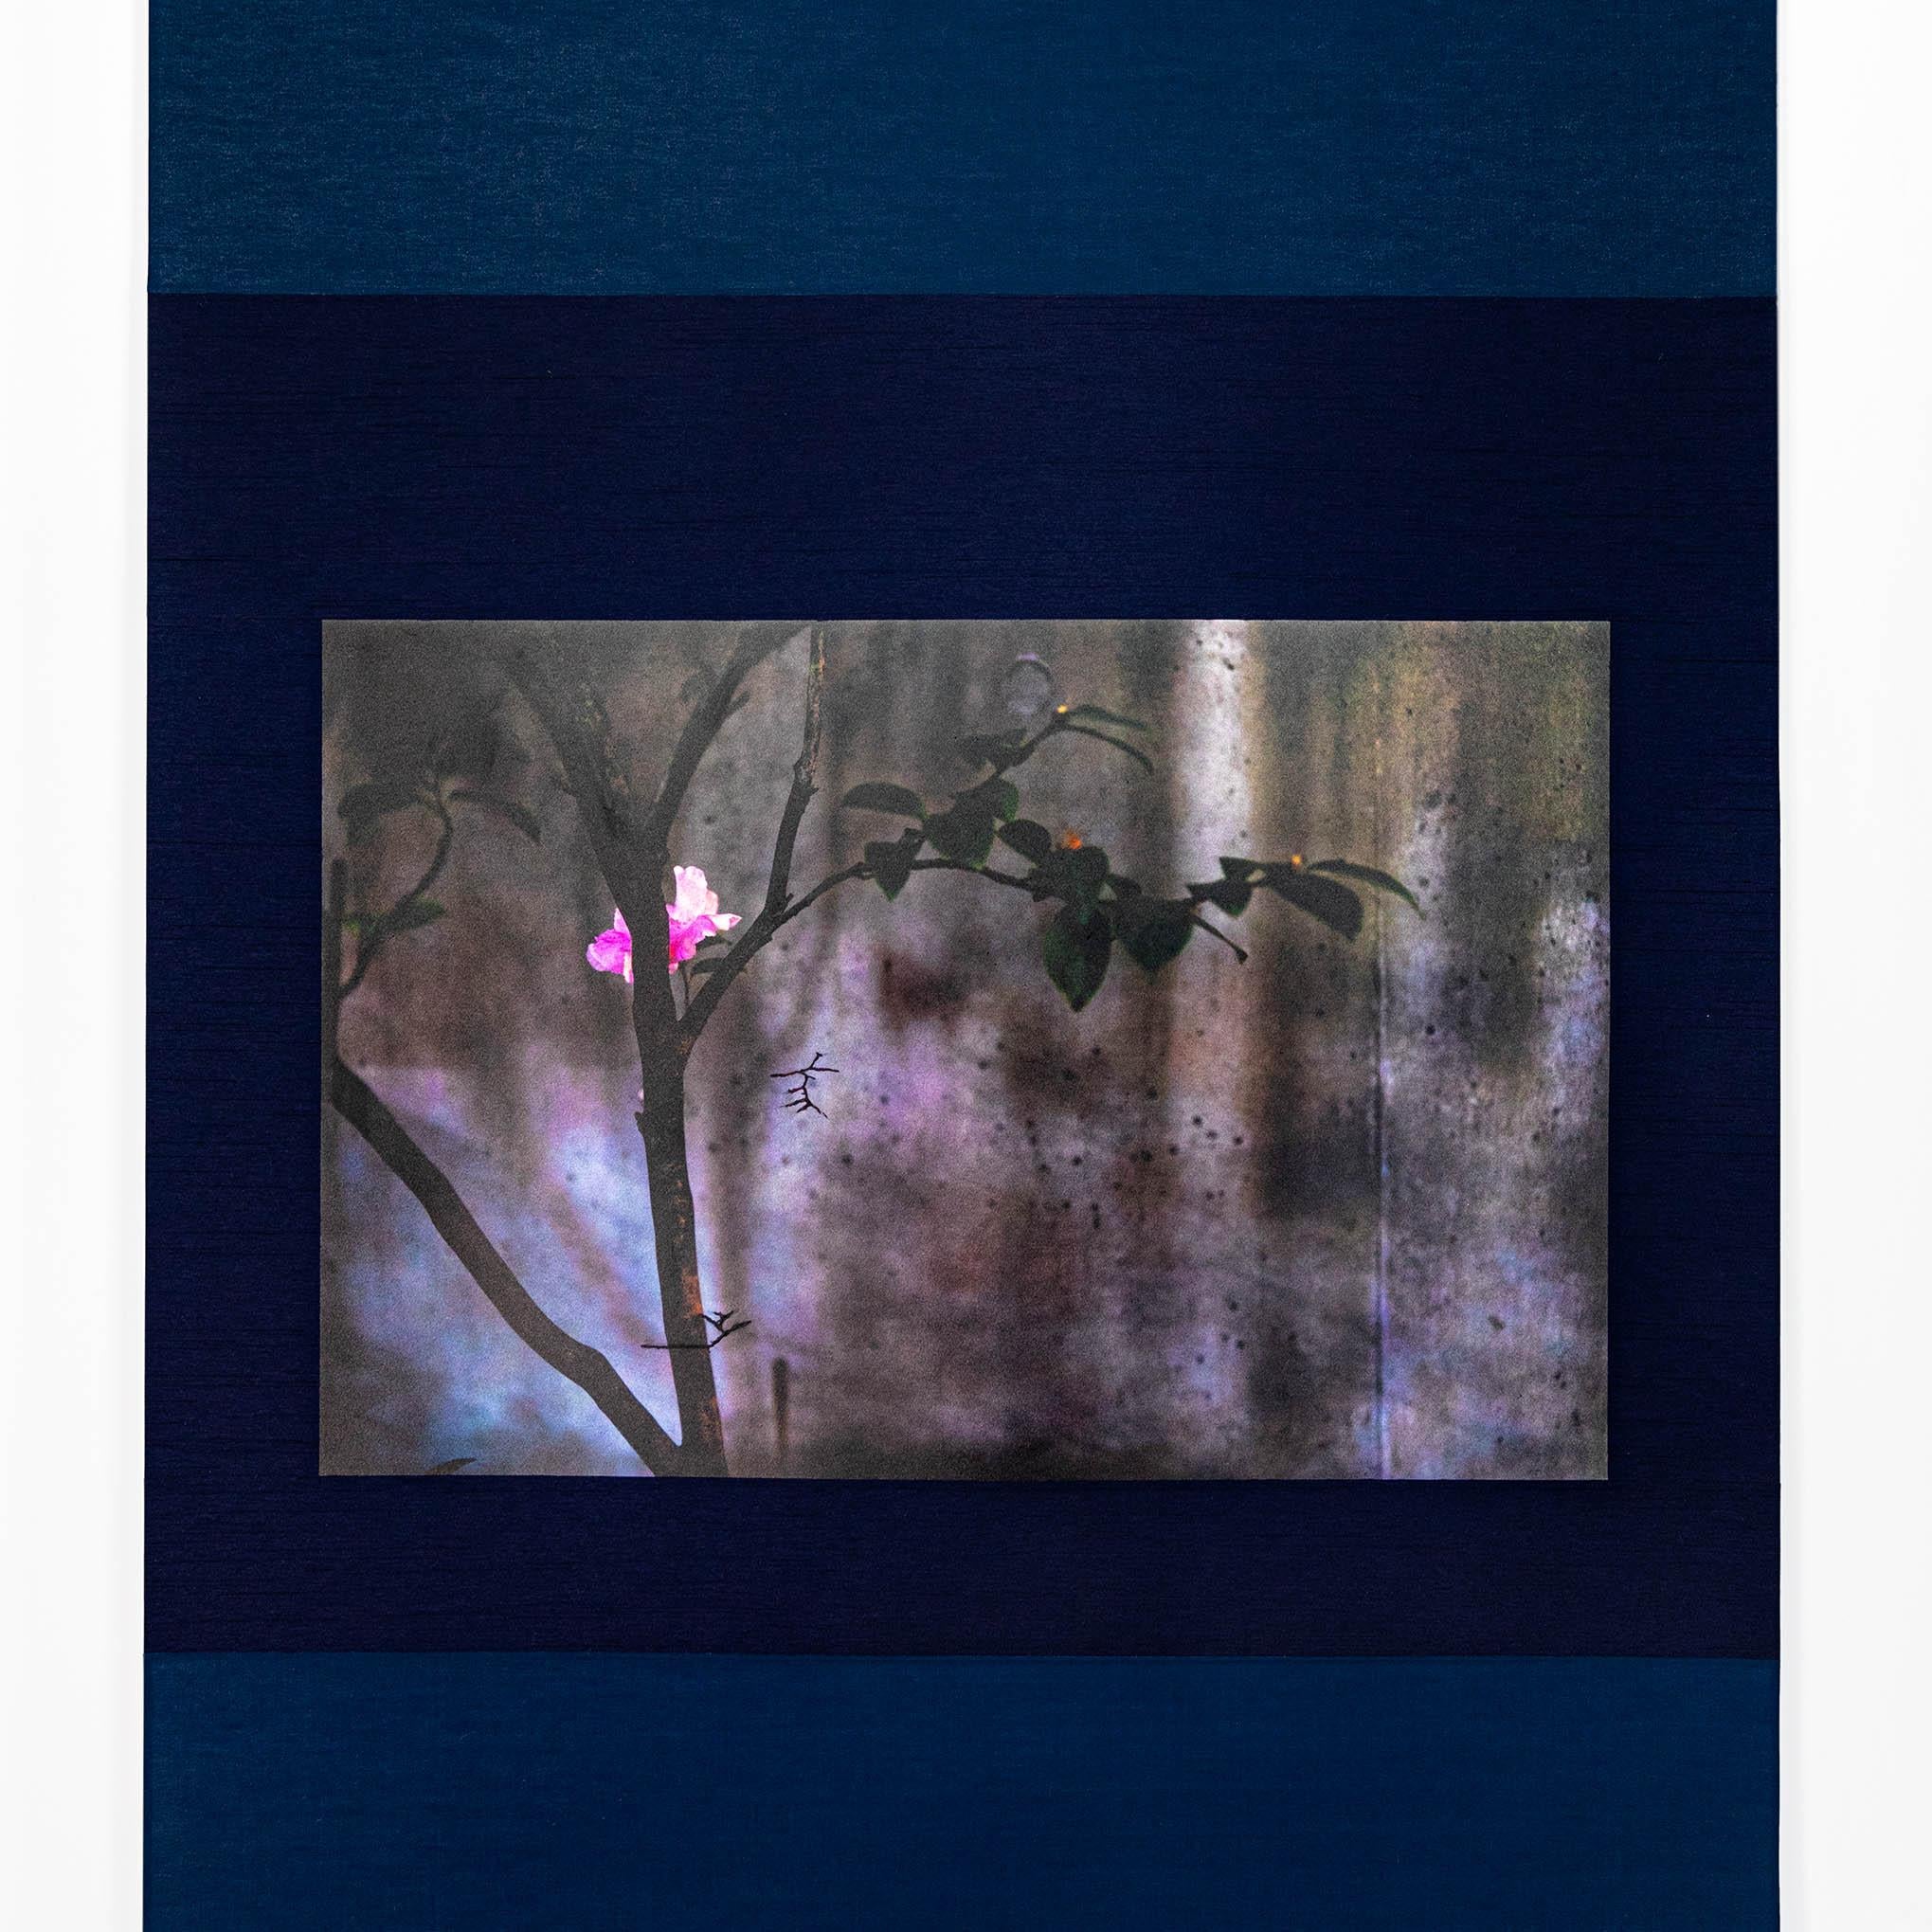 UV print of digital photograph on silver leaf on paper

Kojun is an self-taught multimédia American artist born in 1977 based in Tokyo, Japan since 1999. Kojun project started in 2010 explores the experiences of beauty glimpsed  in everyday life.